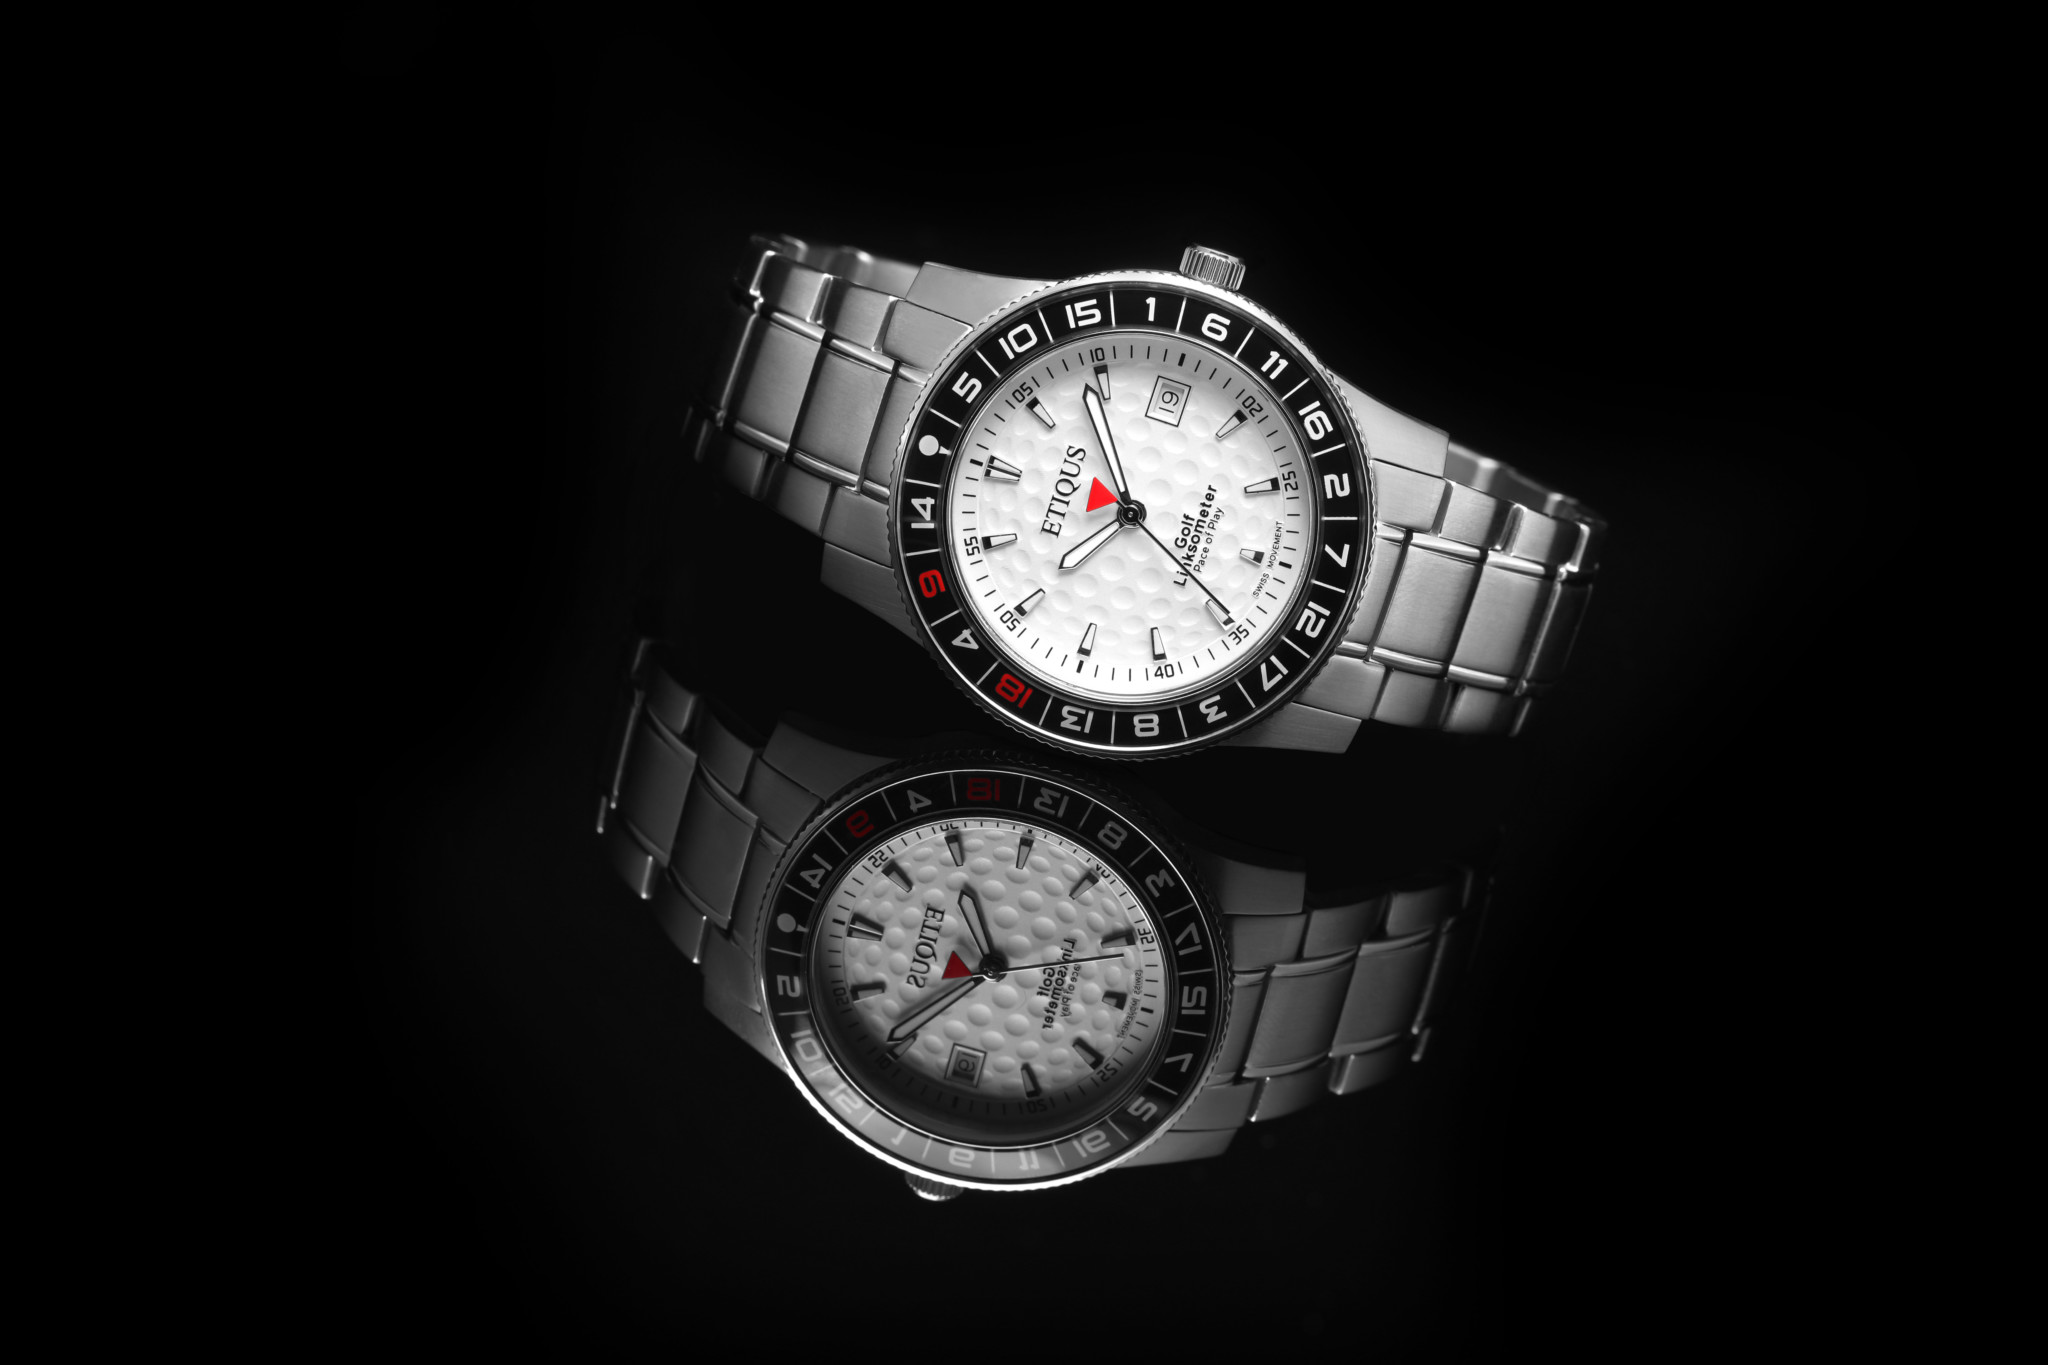 Etiqus sport tour model 9118 - the bezel isn’t just practical but is also a handy way of identifying the wearer as a golfer to other enthusiasts.